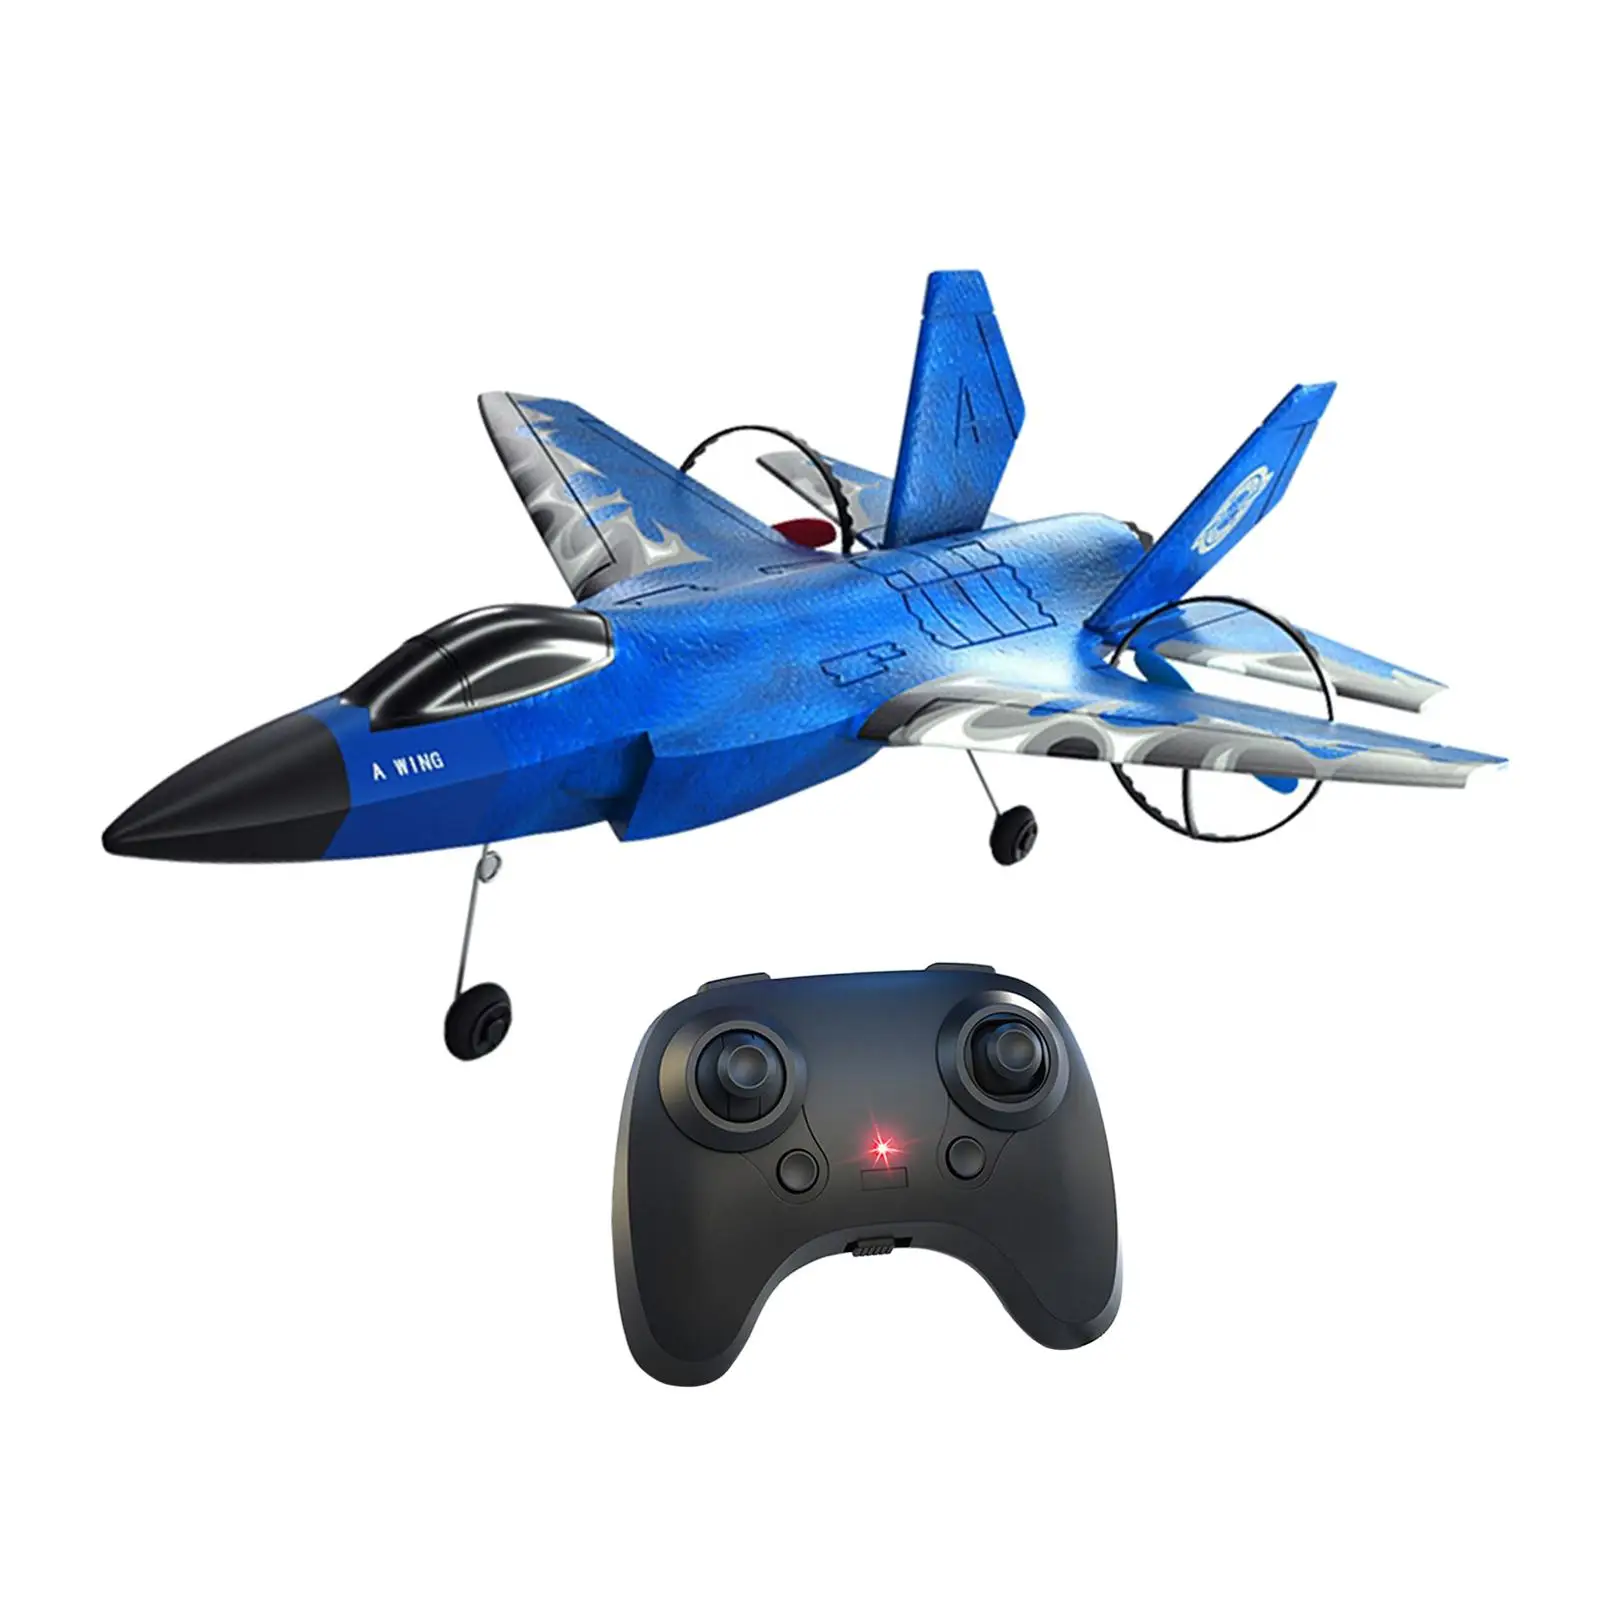 Remote Control Jet Airplane Lightweight Easy to Control Foam RC Airplane RC Glider RC Plane for Kids Beginner Adults Boys Girls